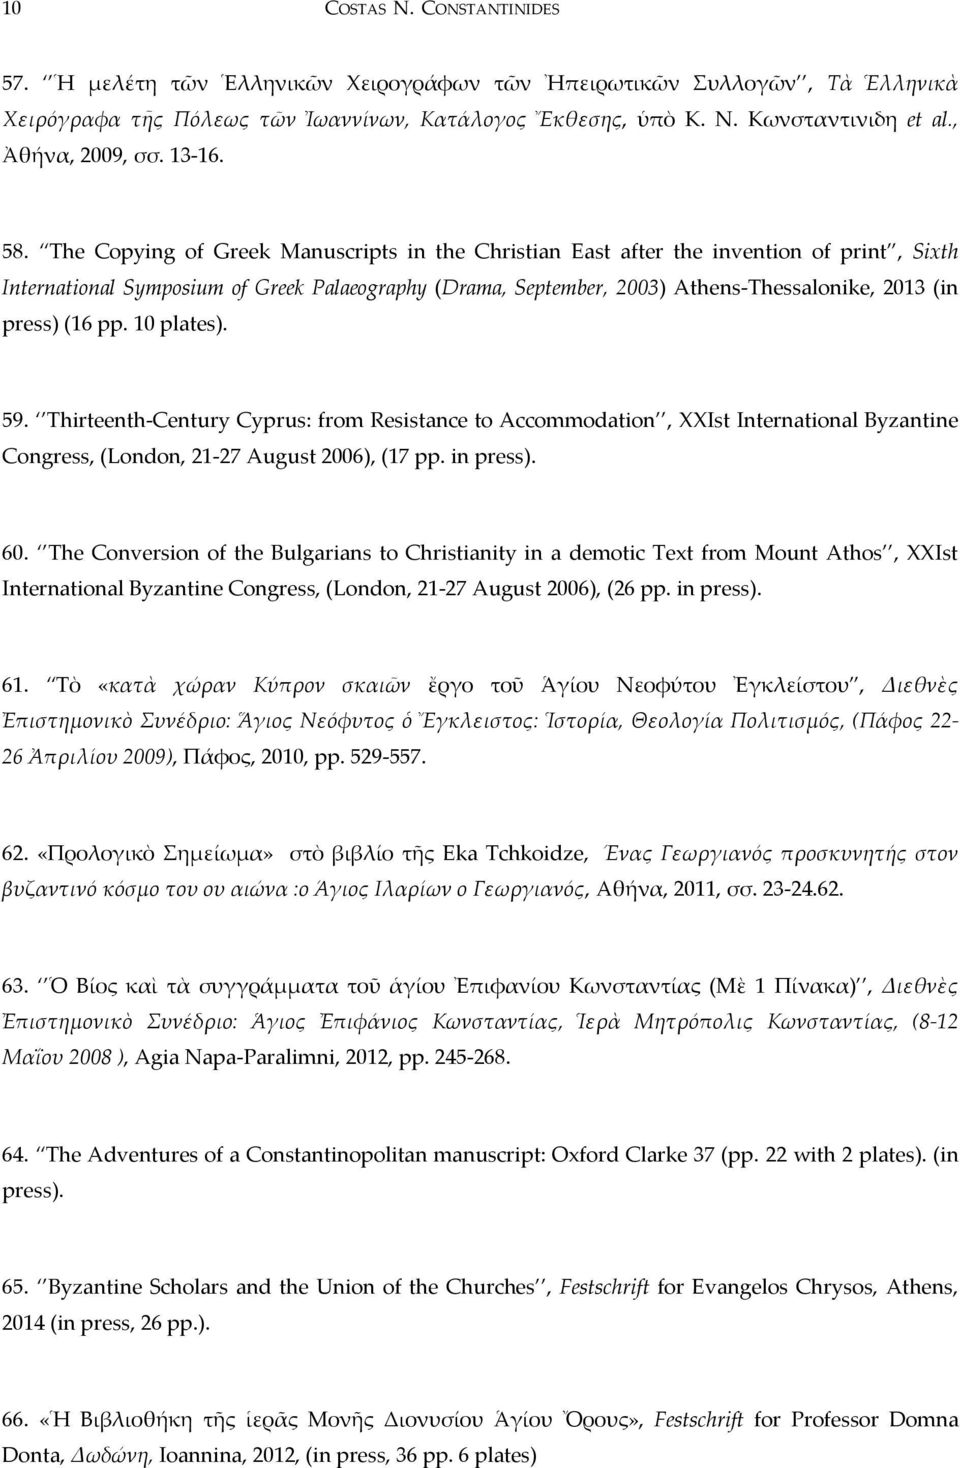 The Copying of Greek Manuscripts in the Christian East after the invention of print, Sixth International Symposium of Greek Palaeography (Drama, September, 2003) Athens-Thessalonike, 2013 (in press)